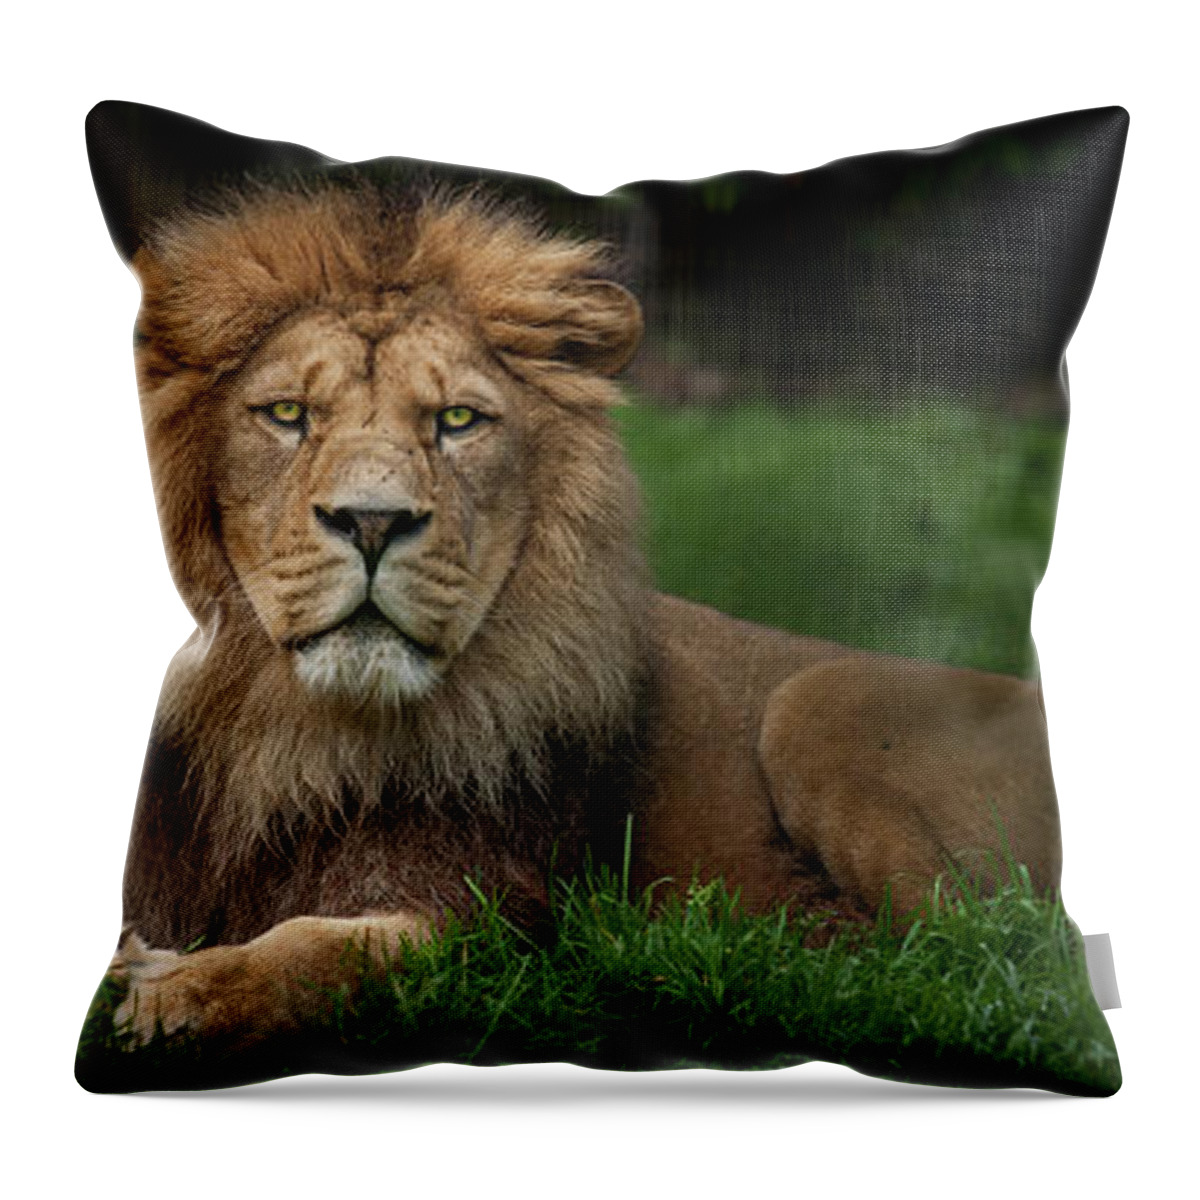 Lion Throw Pillow featuring the photograph Three Lions by Nigel R Bell